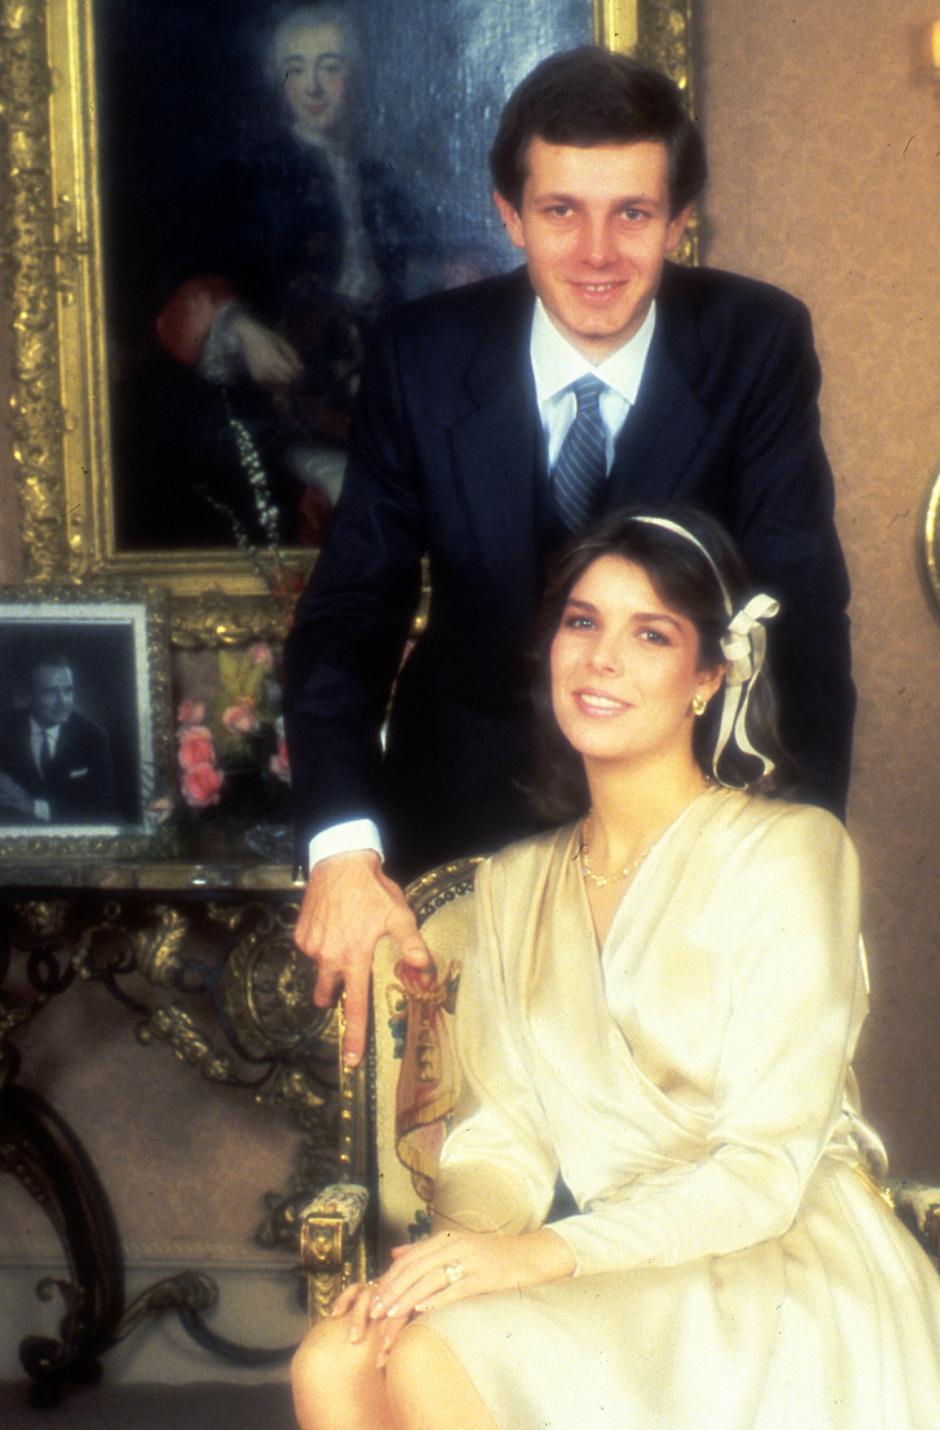 Princess Caroline of Monaco poses with her second husband Stephano Casiraghi after their civil wedding at the royal Palace in Monaco, December 29, 1983.